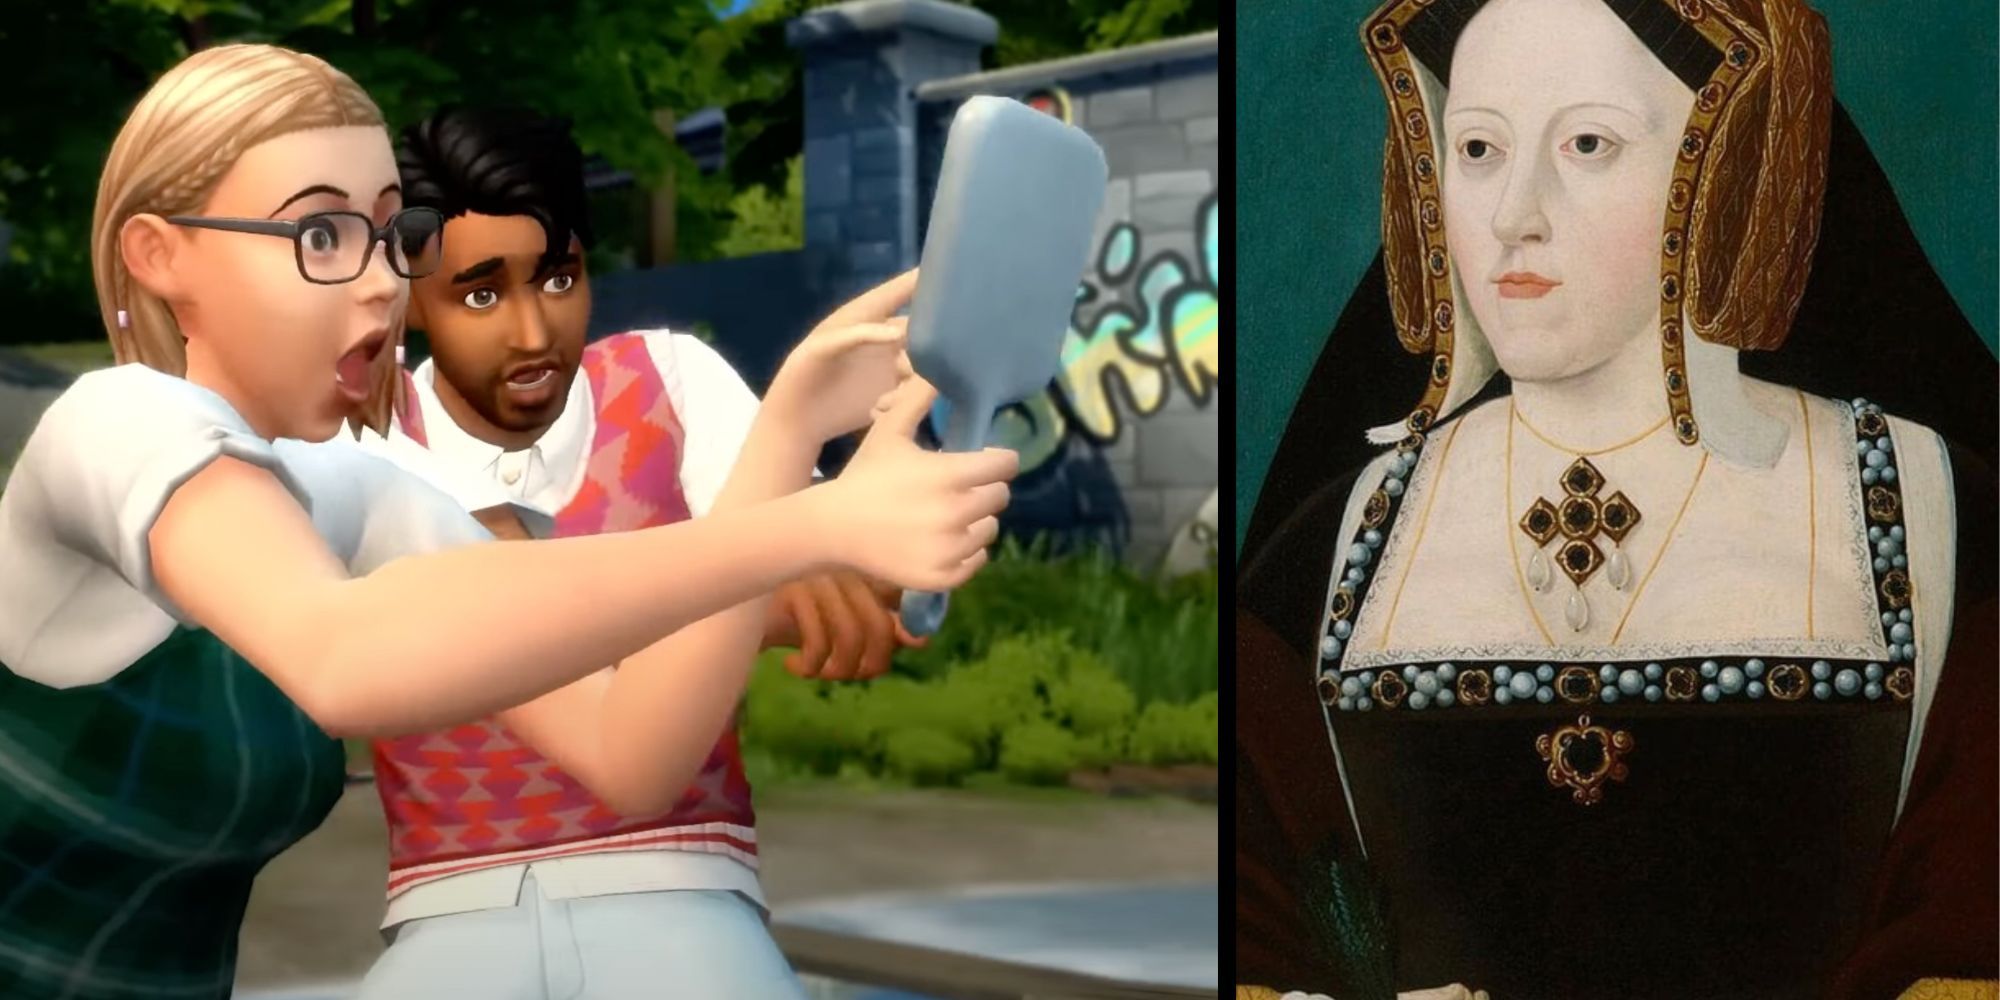 The Sims 4 - High School Years "Summon an Urban Legend" Action and Queen Mary I